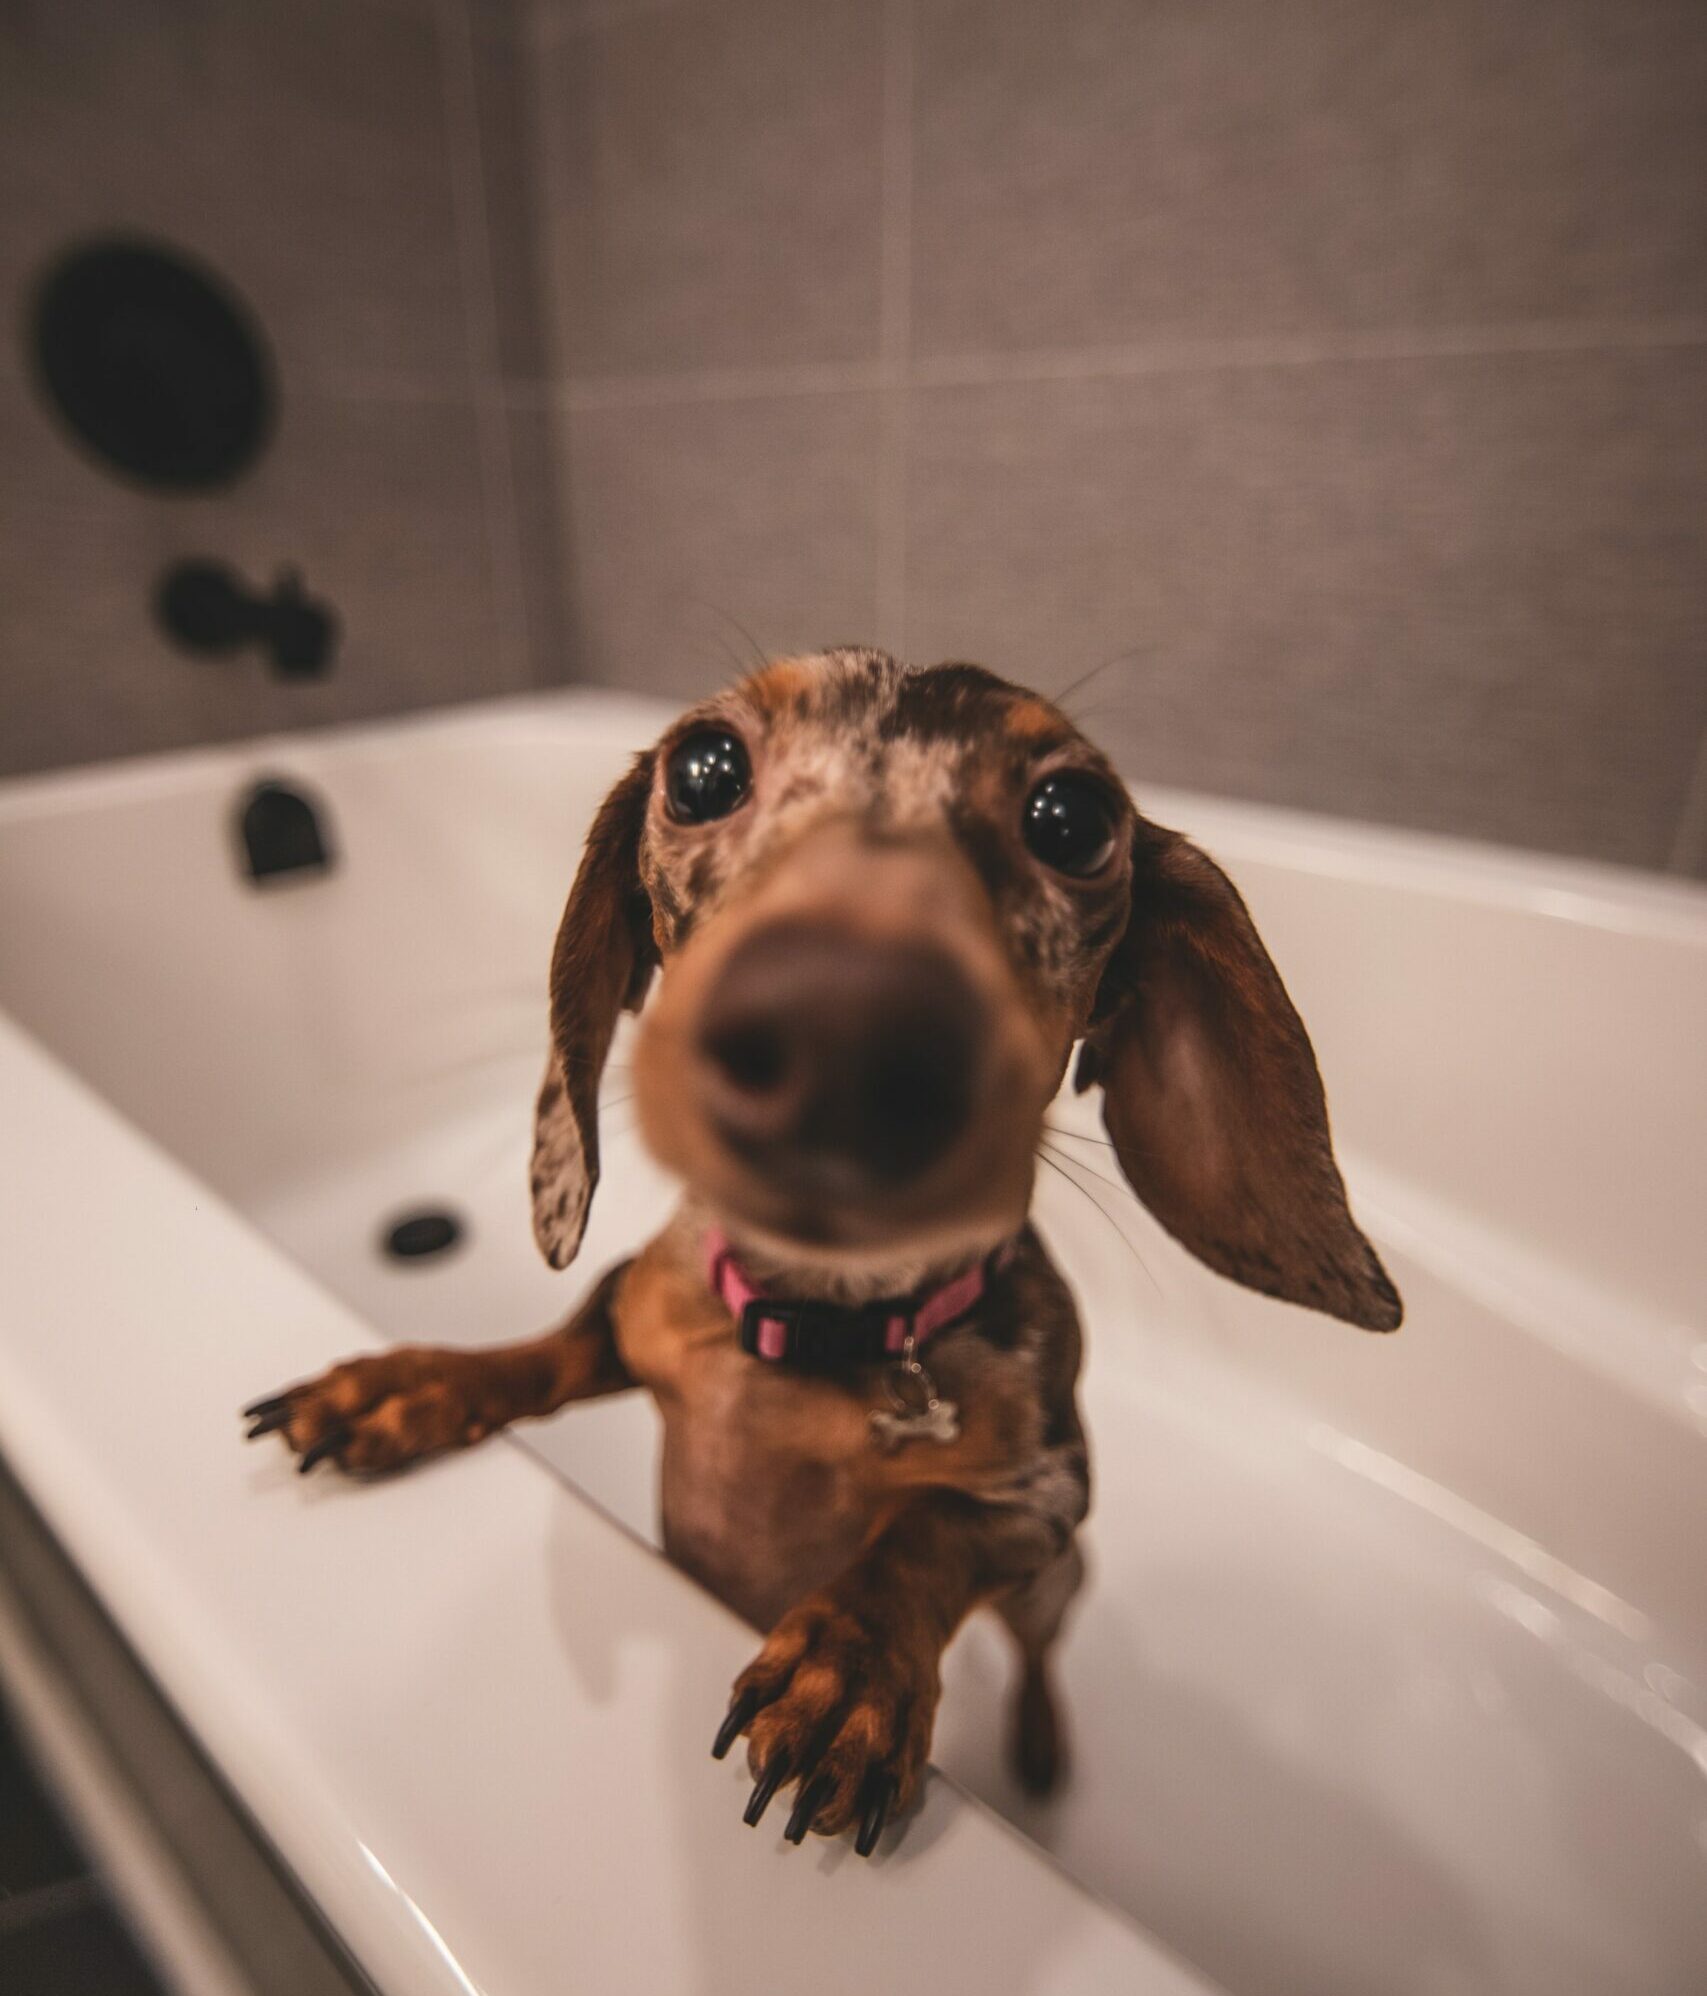 How To Train Your Dog To Swim In A Bathtub?